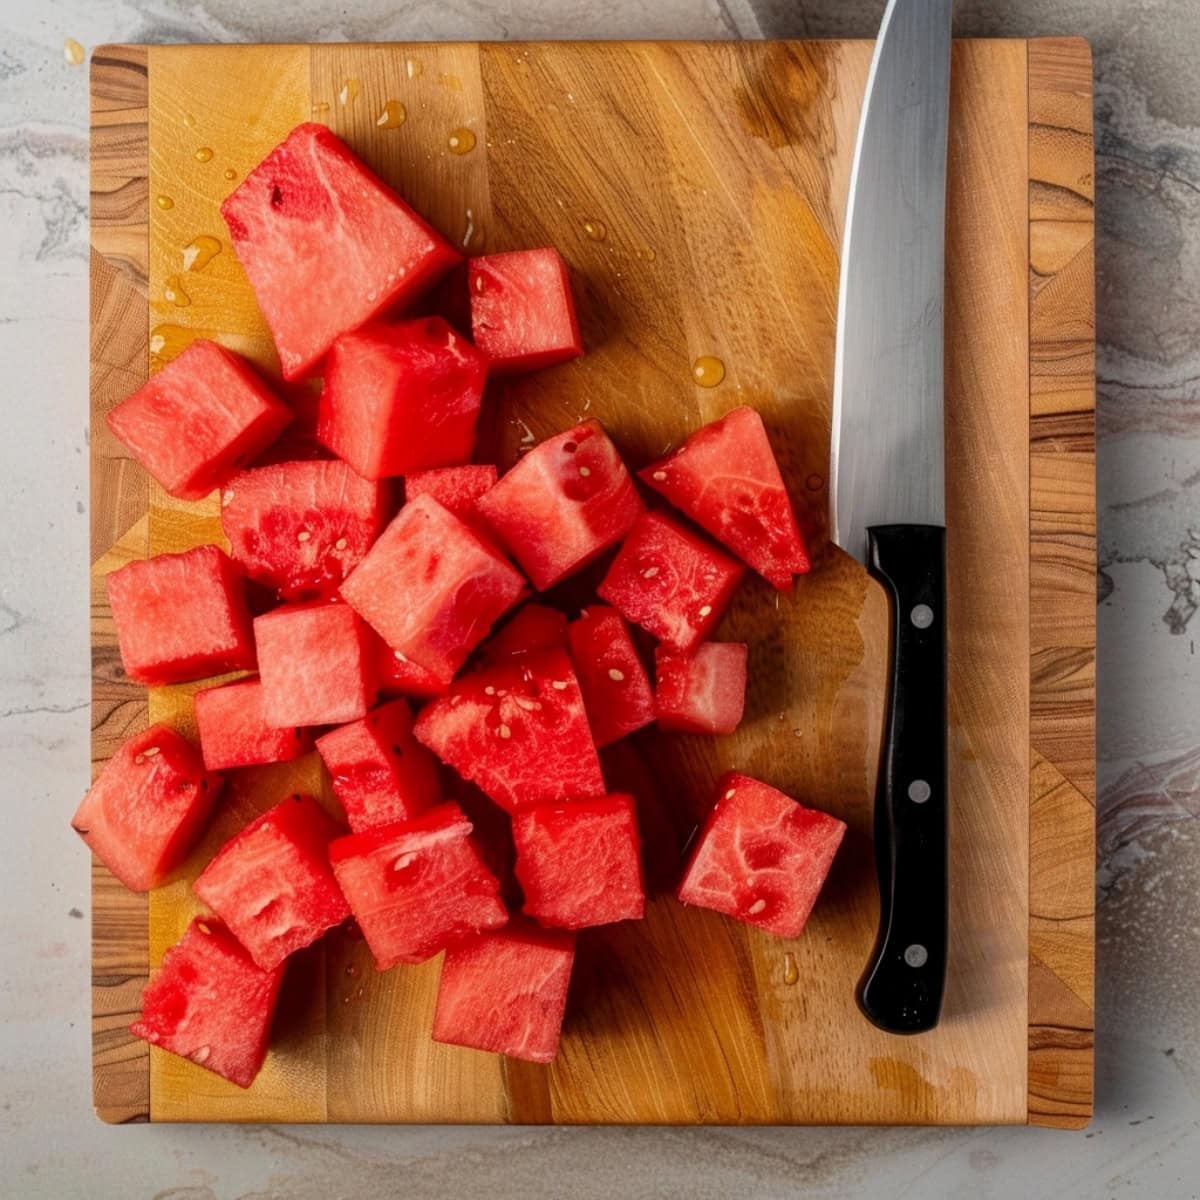 Cubed watermelon on a chopping board with a kinfe.